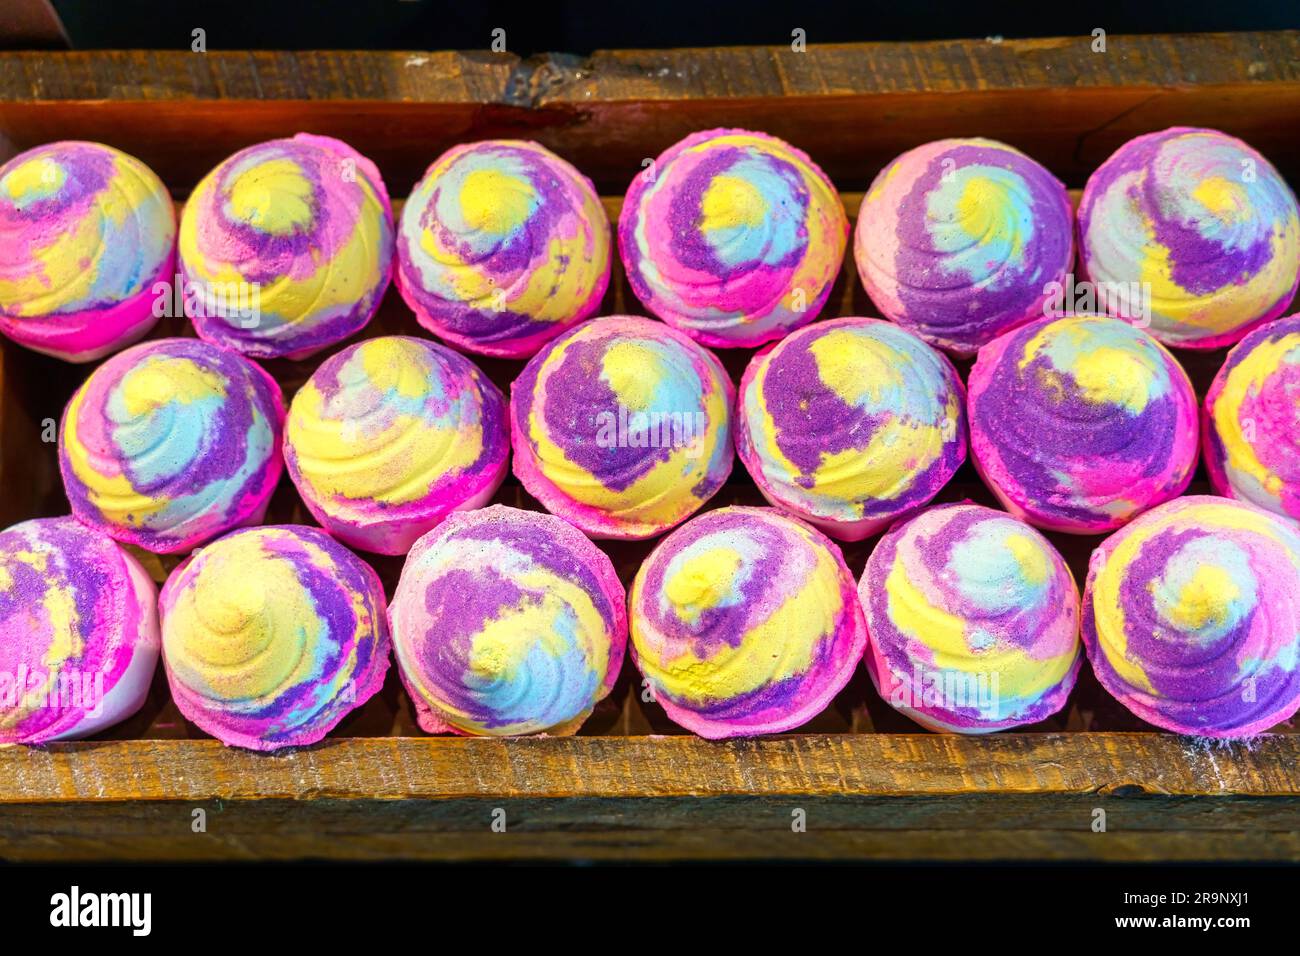 Multi-color handcrafted soaps imitating a cupcake. They are in a store shelf. Stock Photo